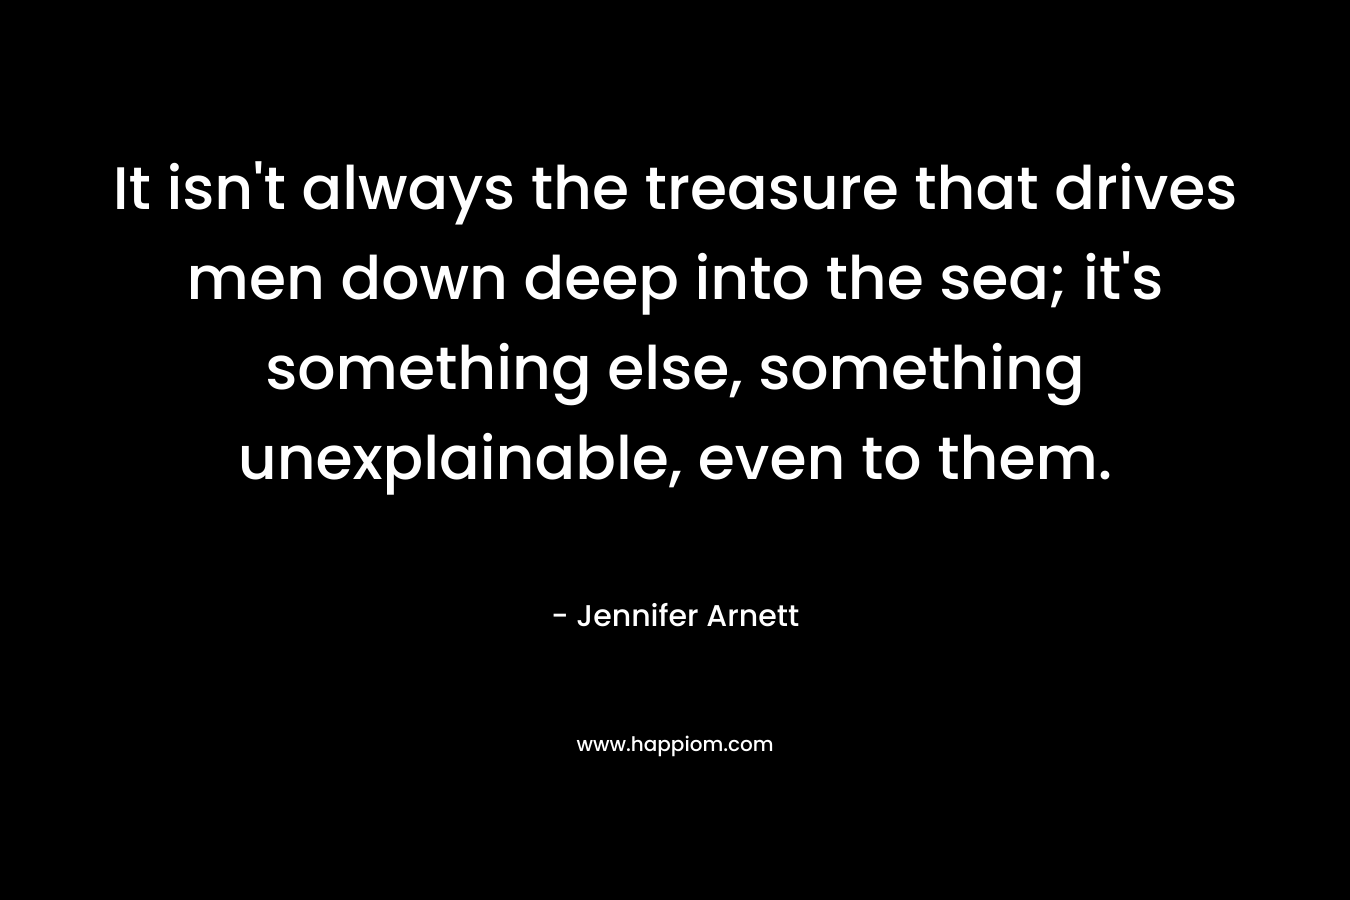 It isn't always the treasure that drives men down deep into the sea; it's something else, something unexplainable, even to them.